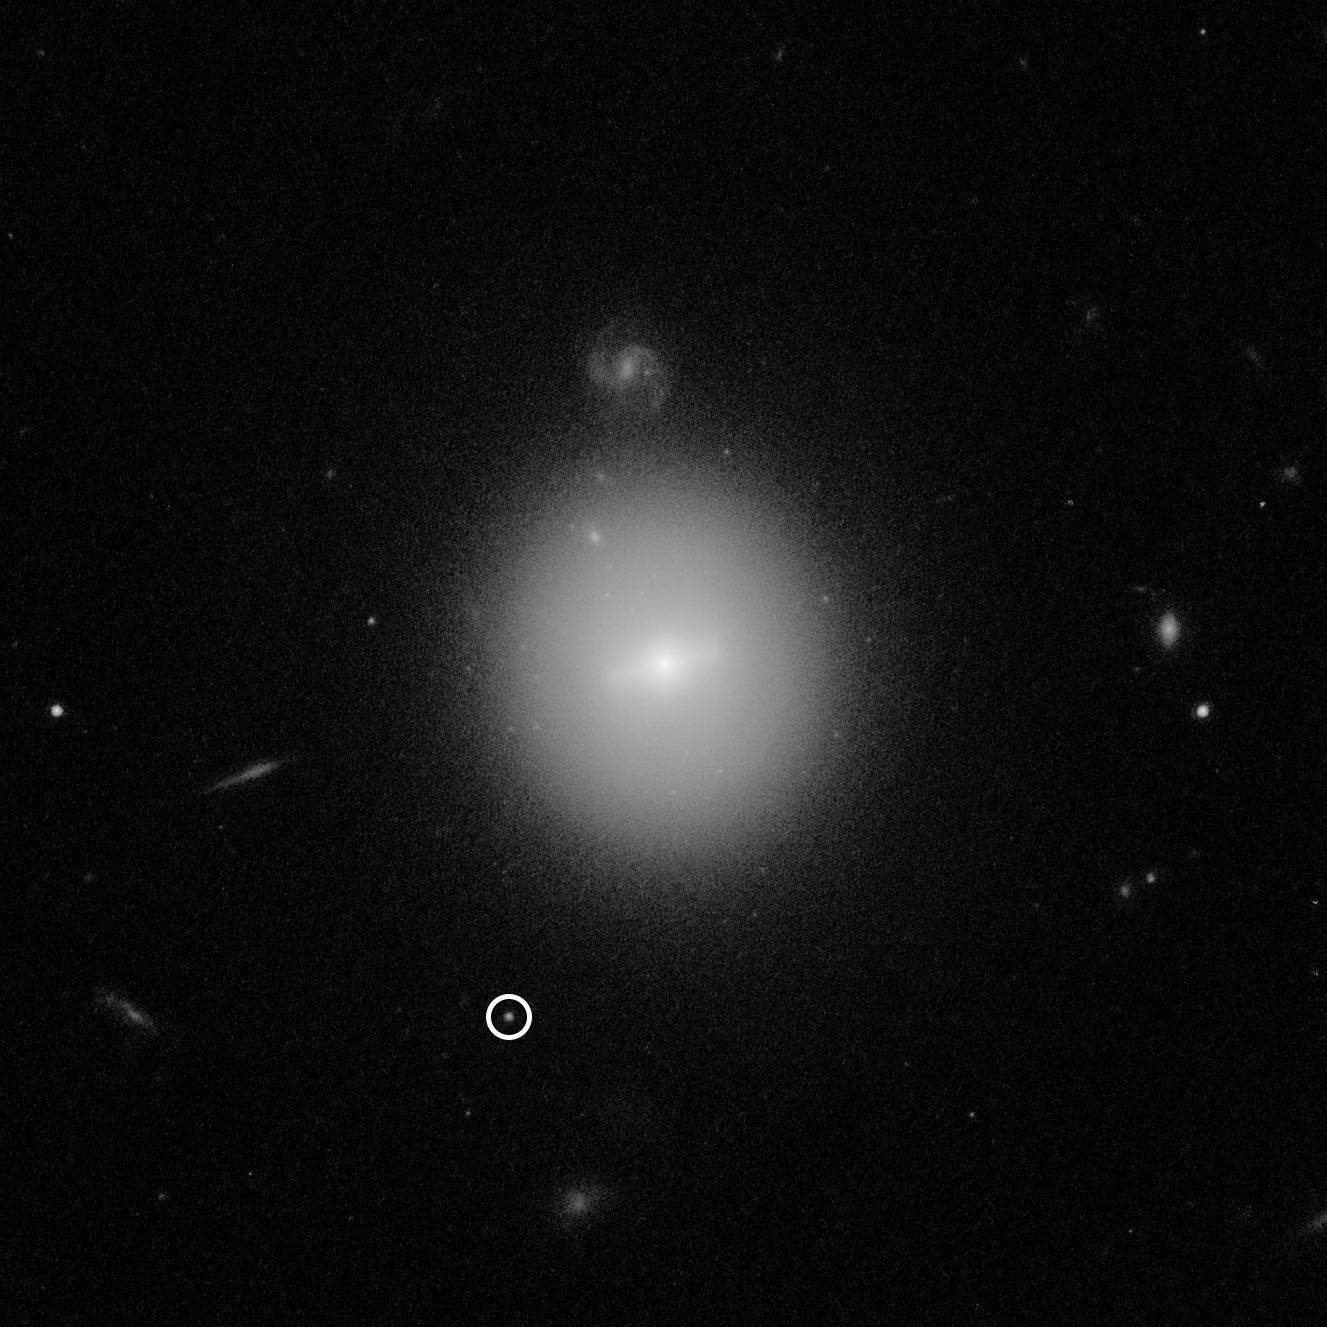 black-and-white image from Hubble showing location of black hole